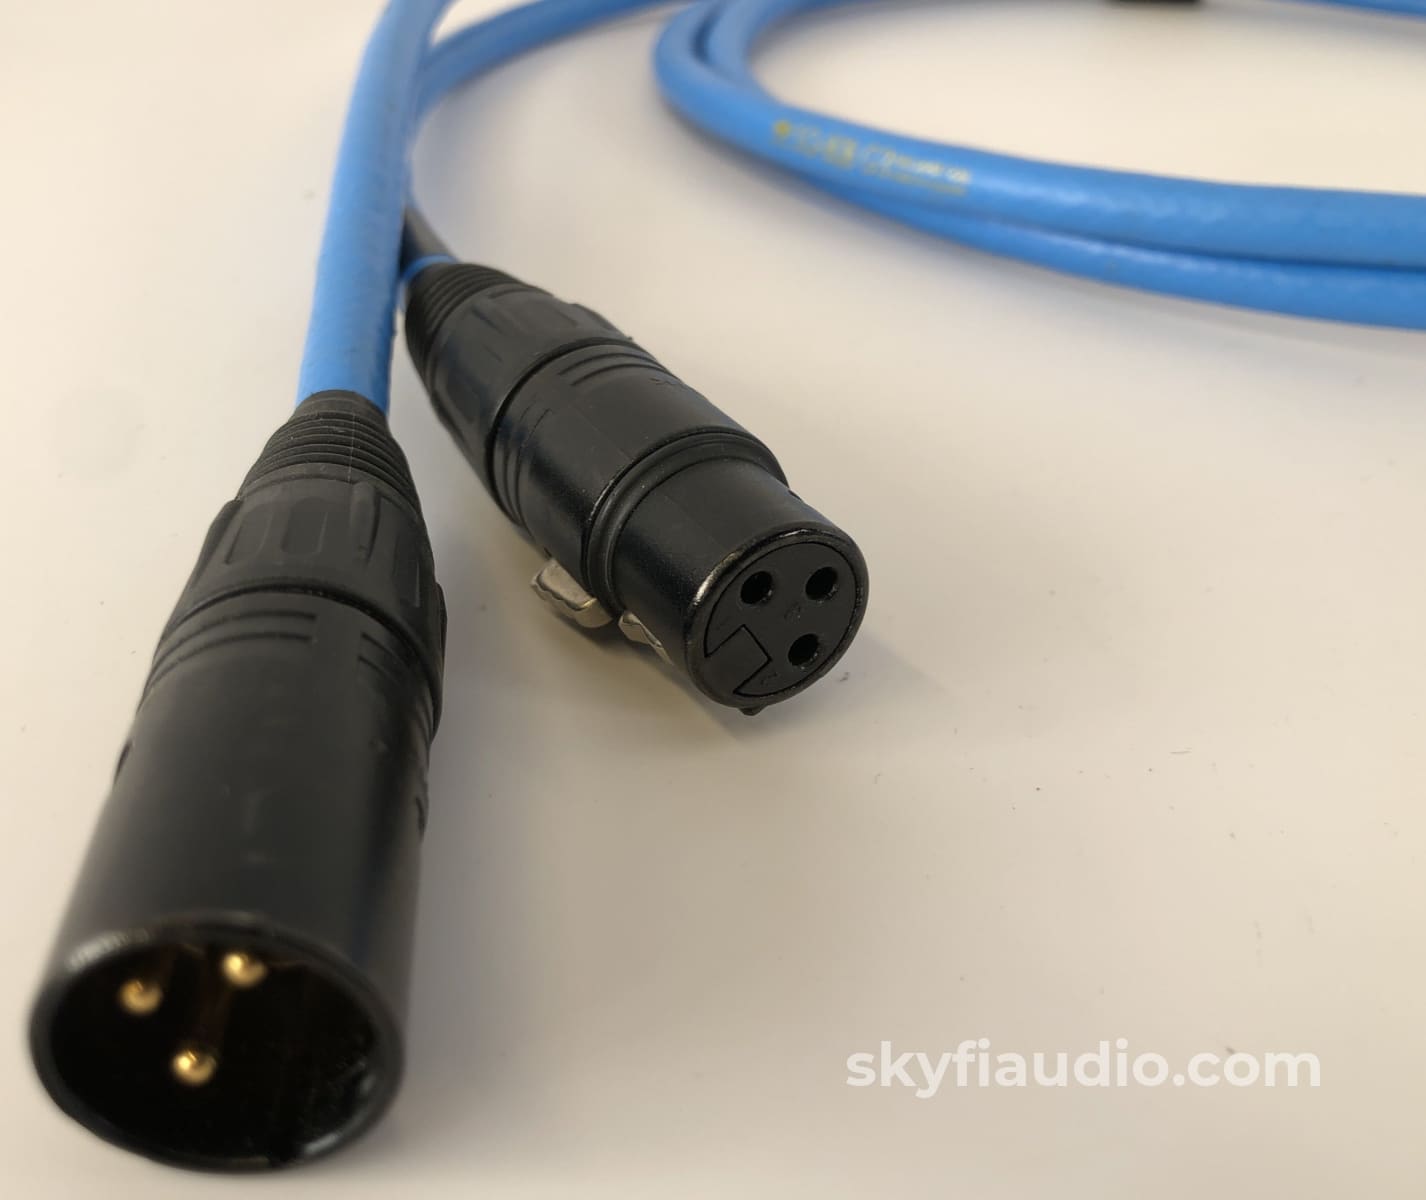 Siltech Cables - Sq-80B G3 Xlr Interconnects With Original Box 5